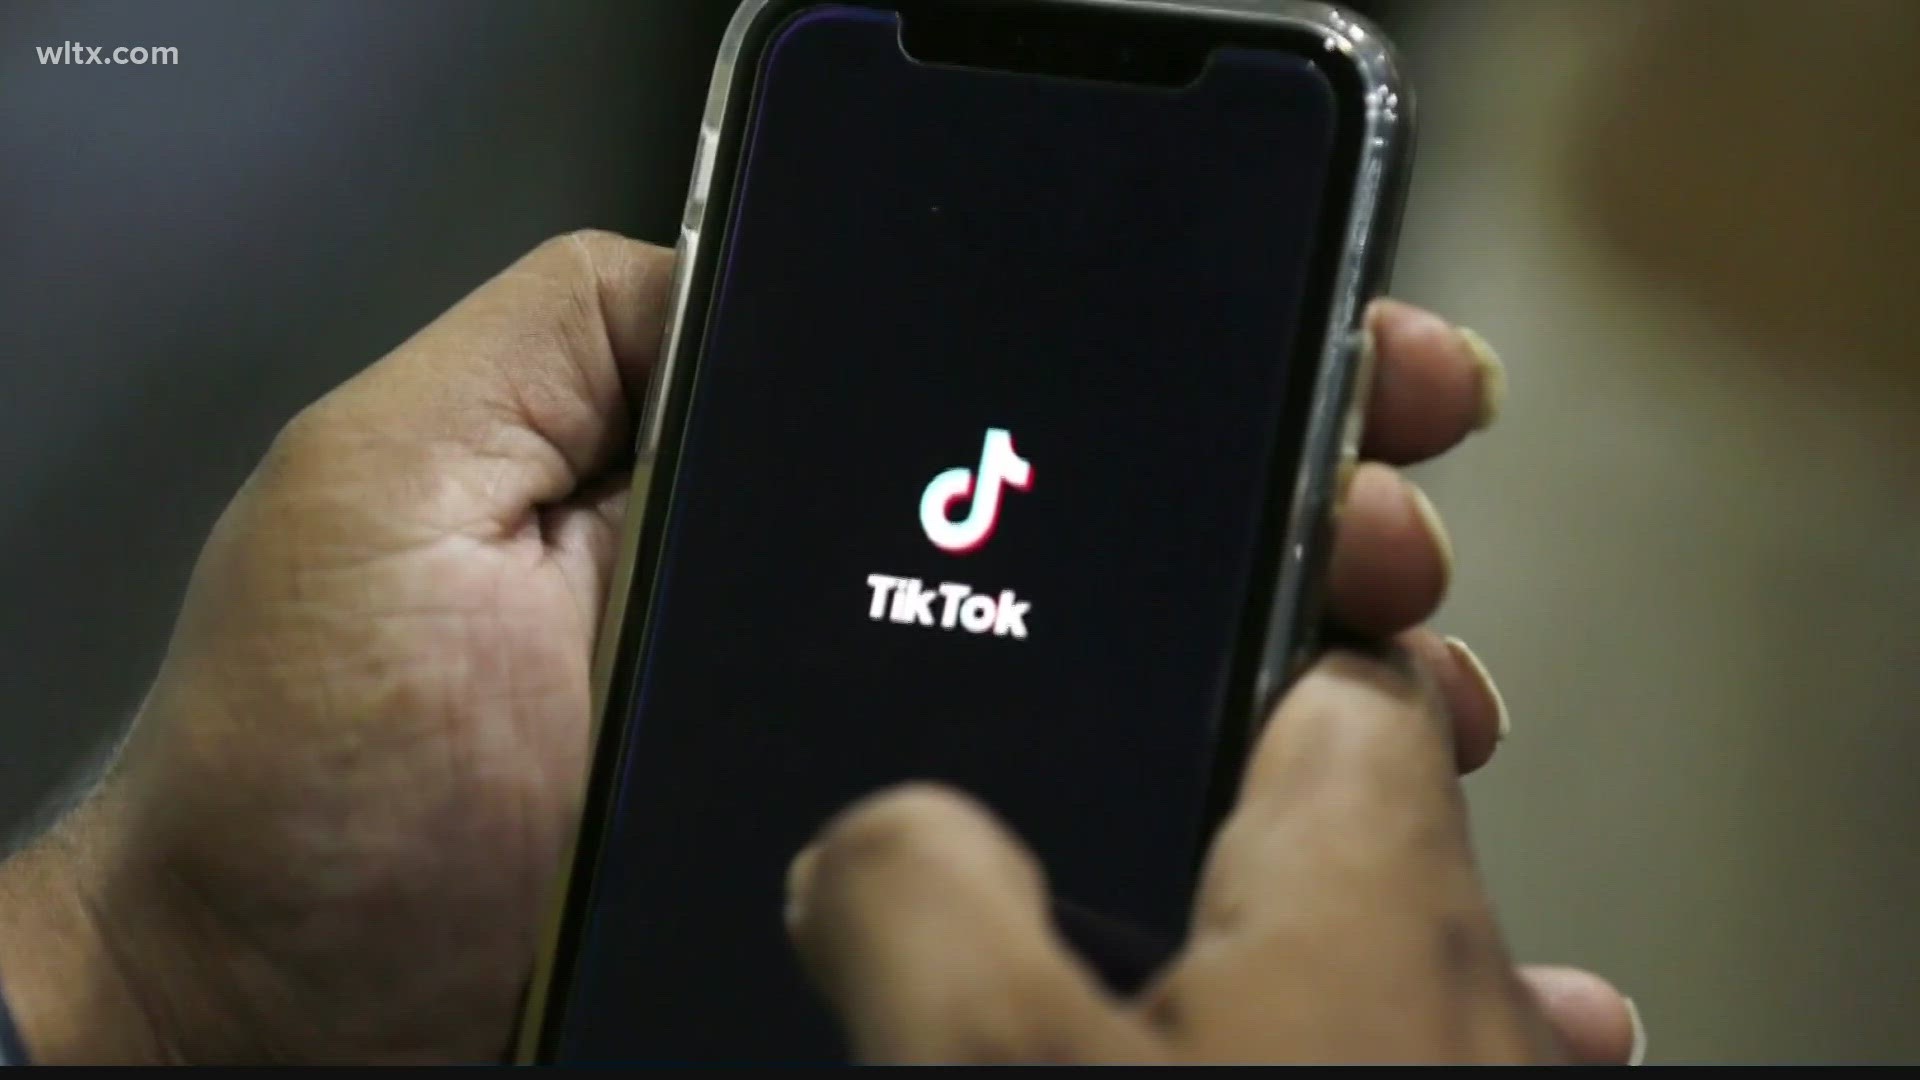 Clemson has become the latest university to ban people from using TikTok on their campuswide system.